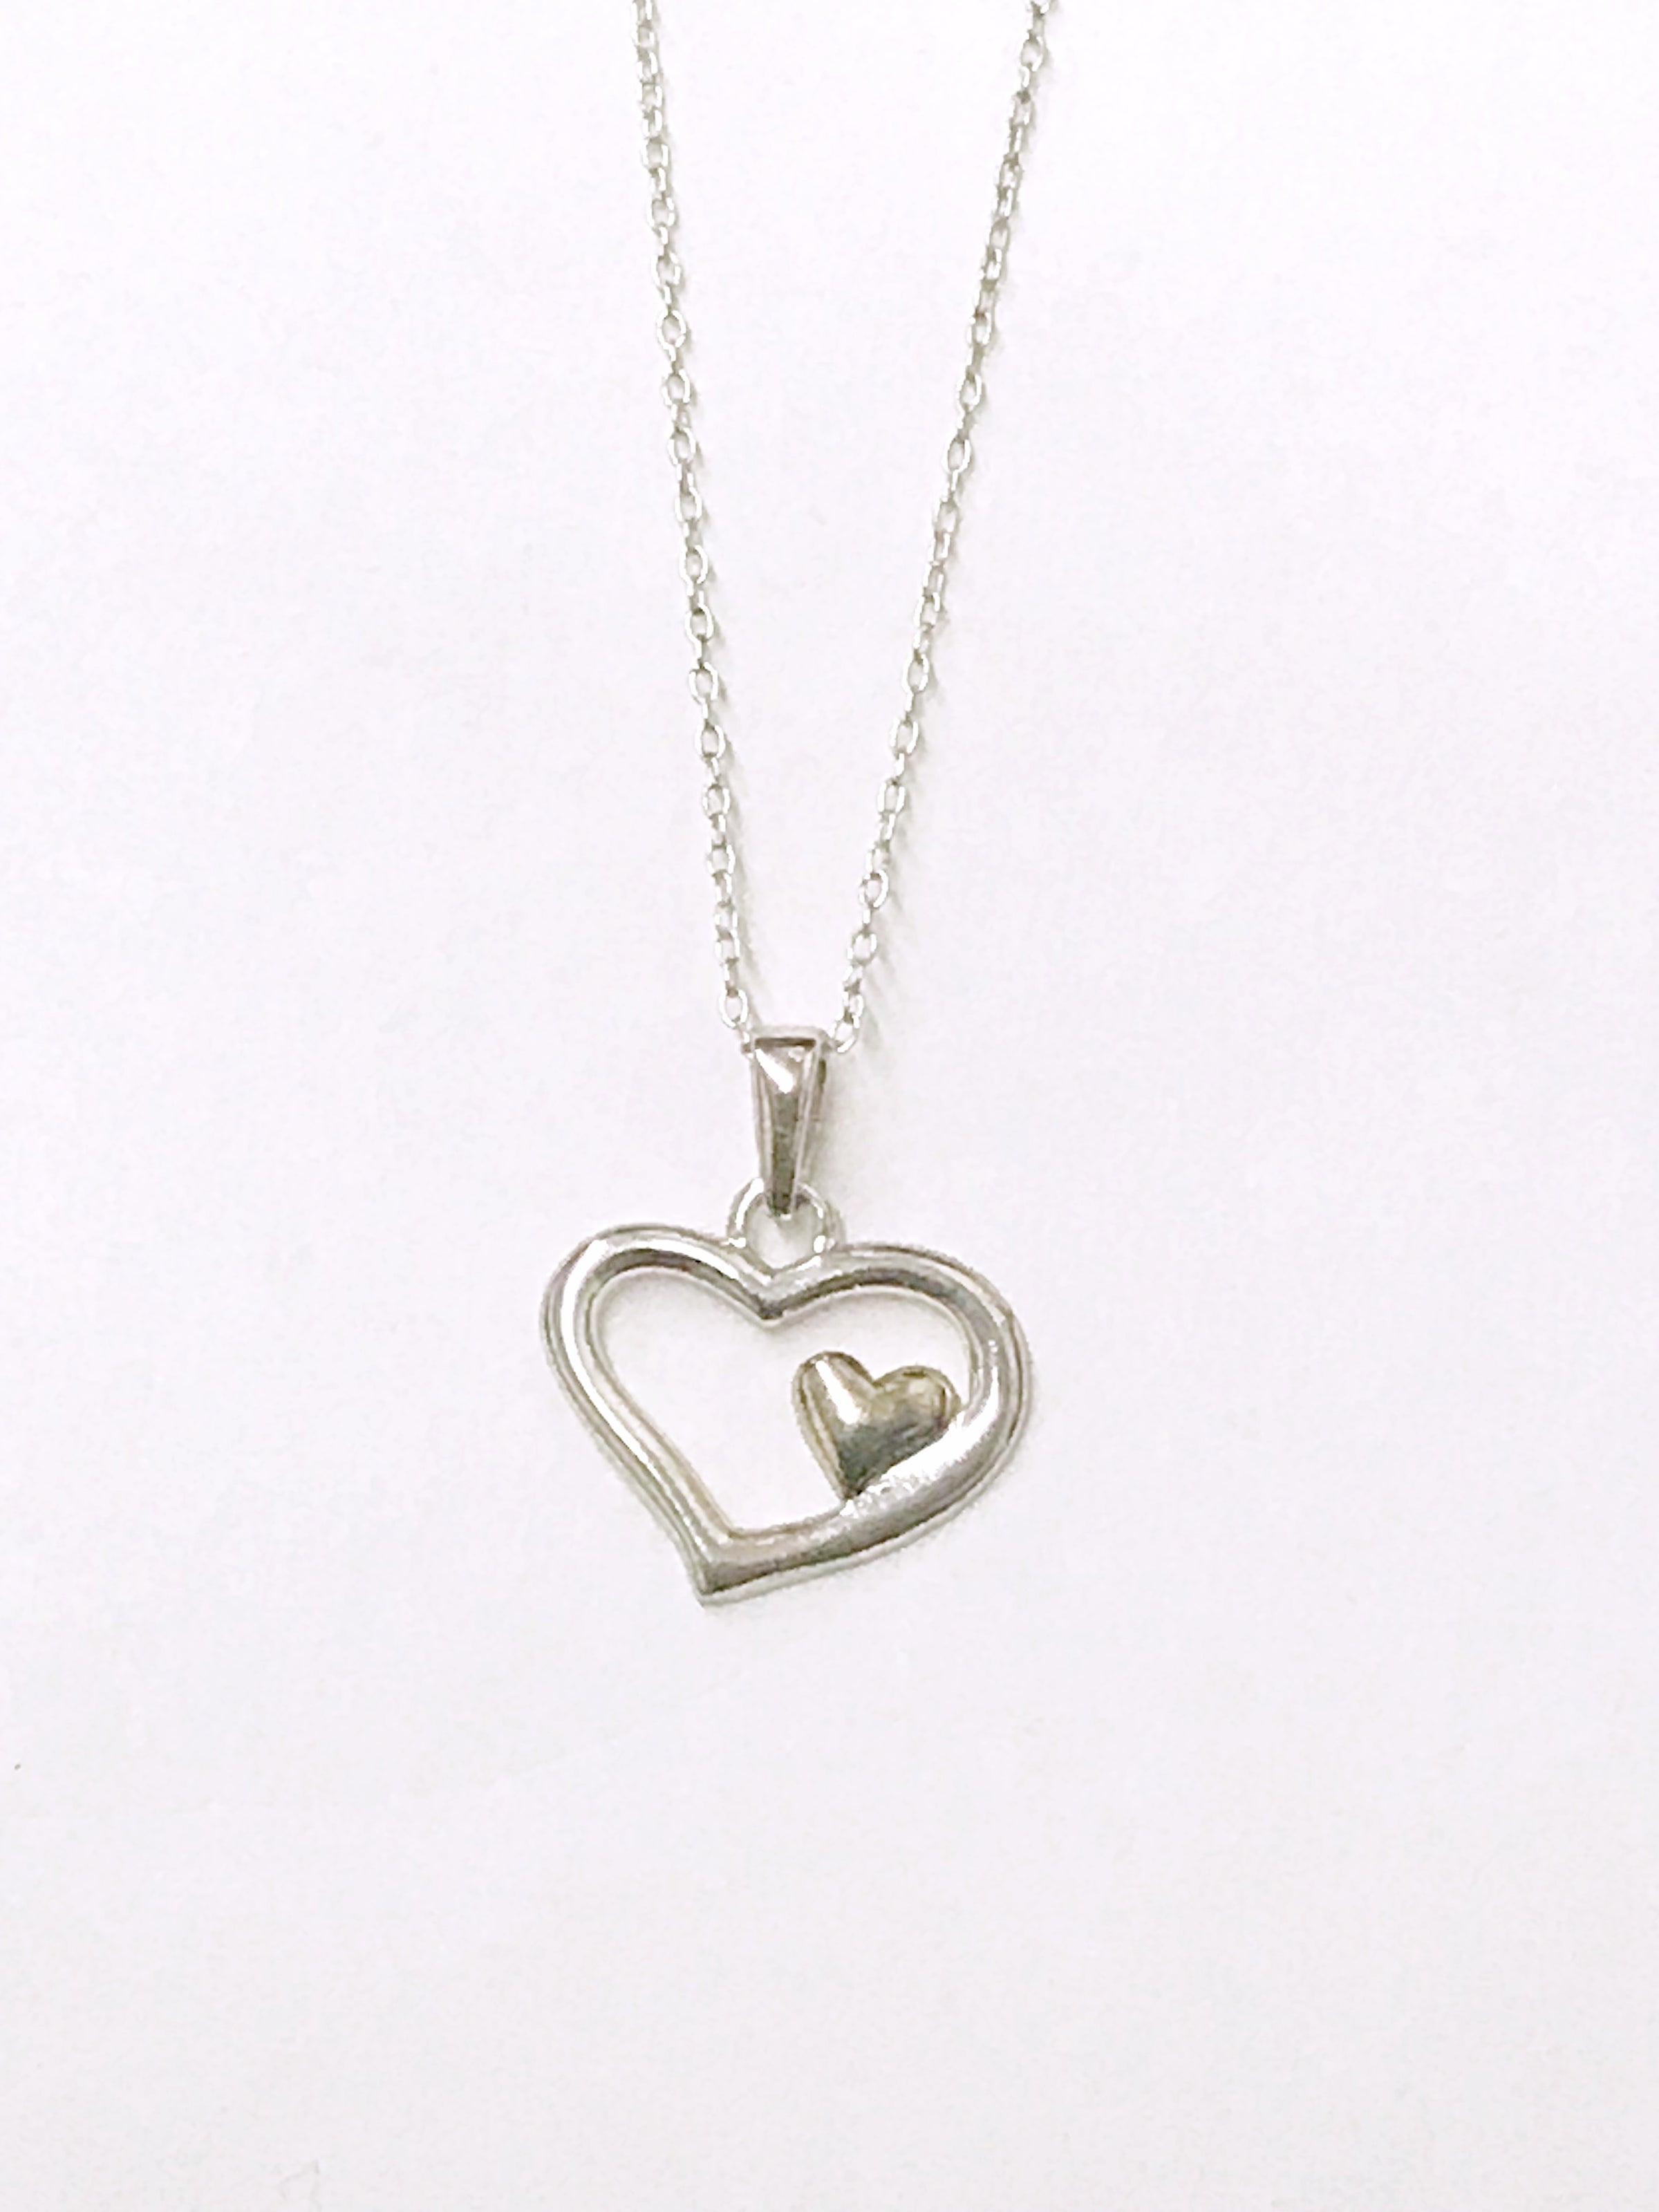 www.hersandhistreasures.com/products/heart-within-a-heart-sterling-silver-necklace